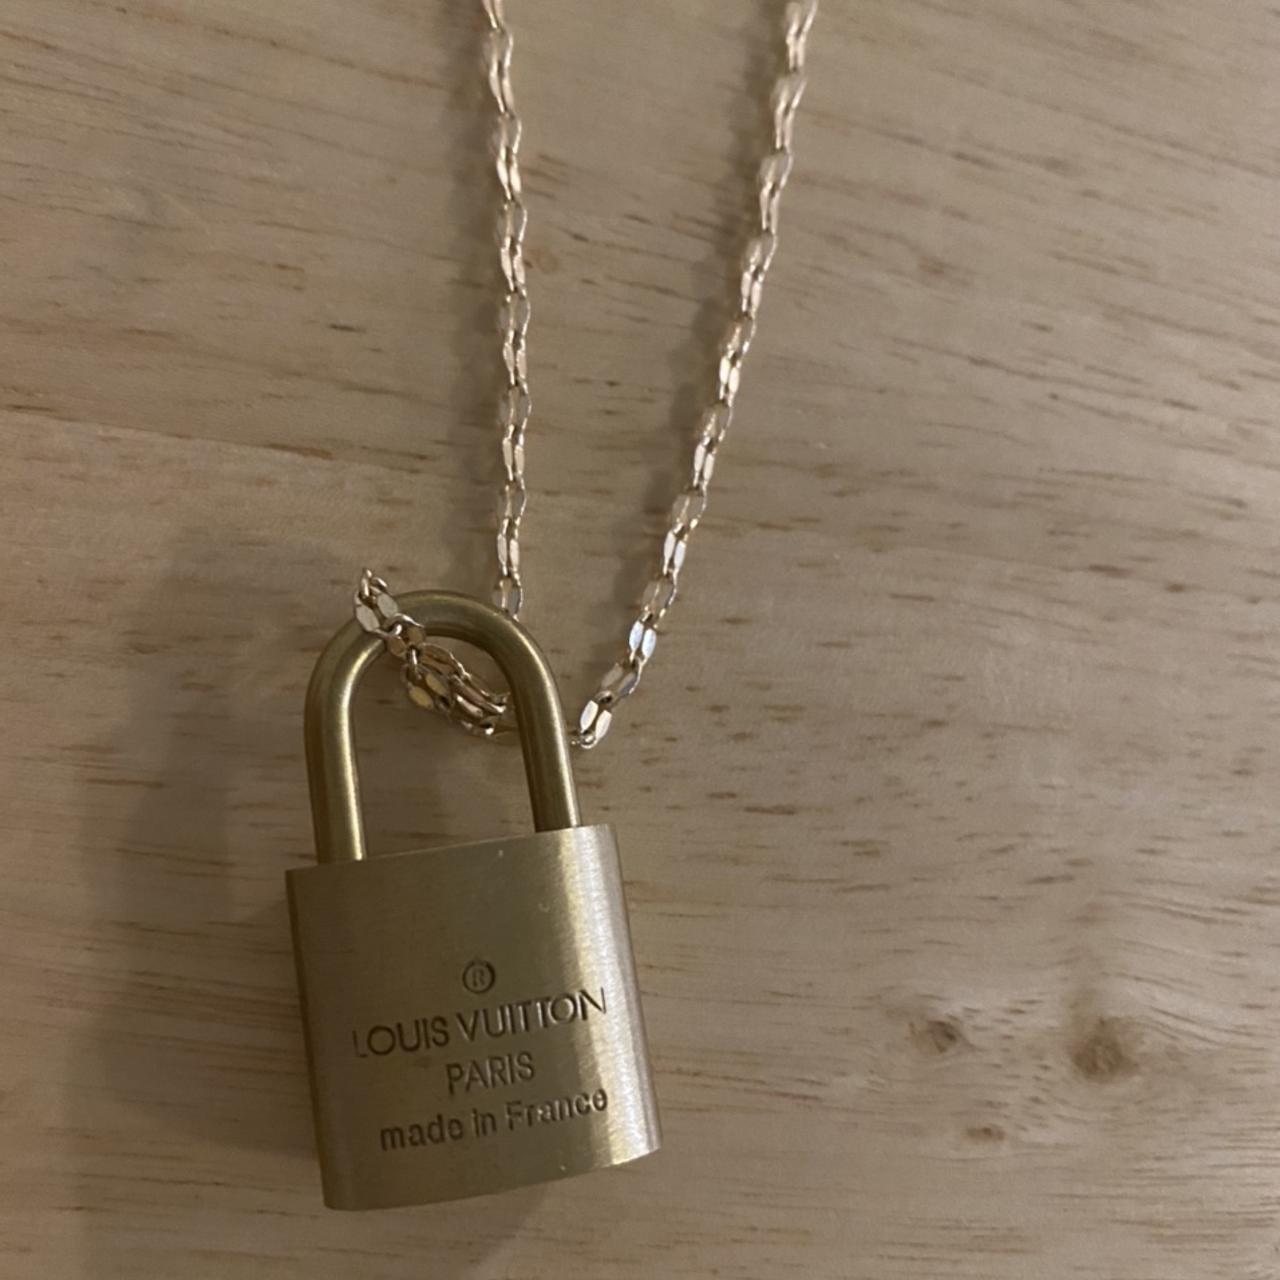 On HOLD - Authentic Louis Vuitton Lock necklace - Depop